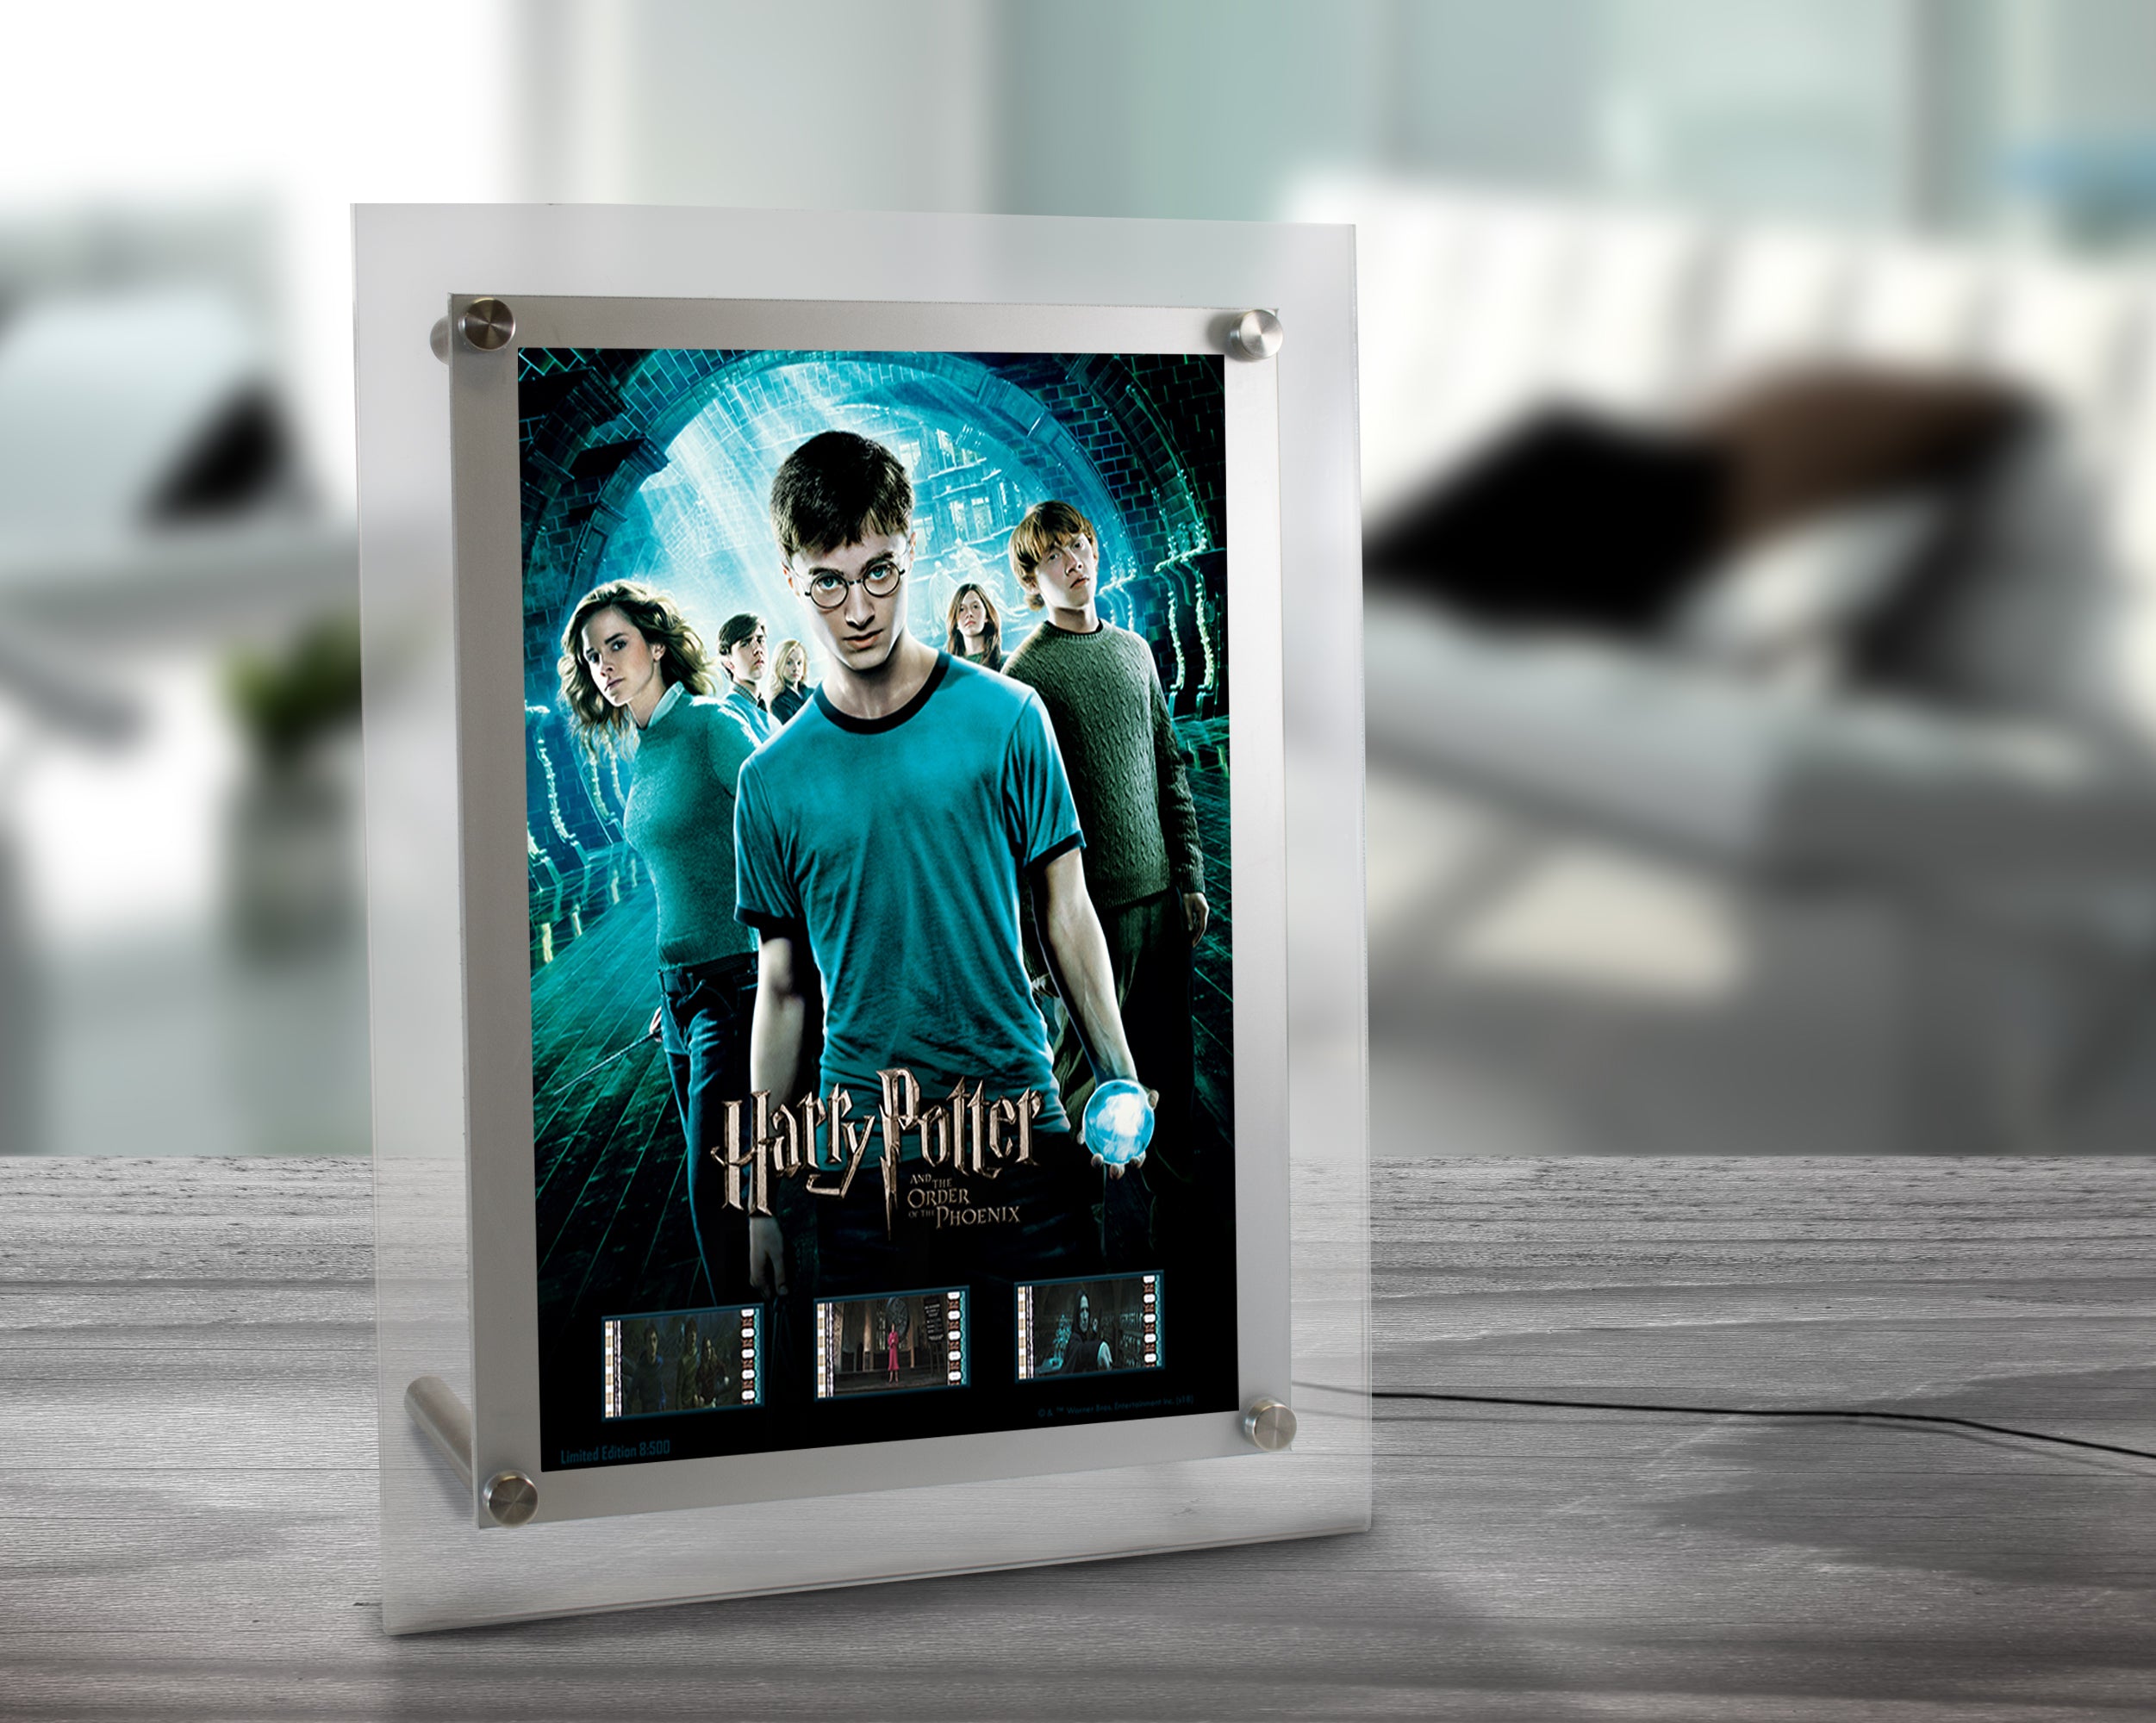 Harry Potter and the Order of the Phoenix (Official Movie Artwork) Limited Edition LightCell FilmCells Presentation with LED Frame LC0710021